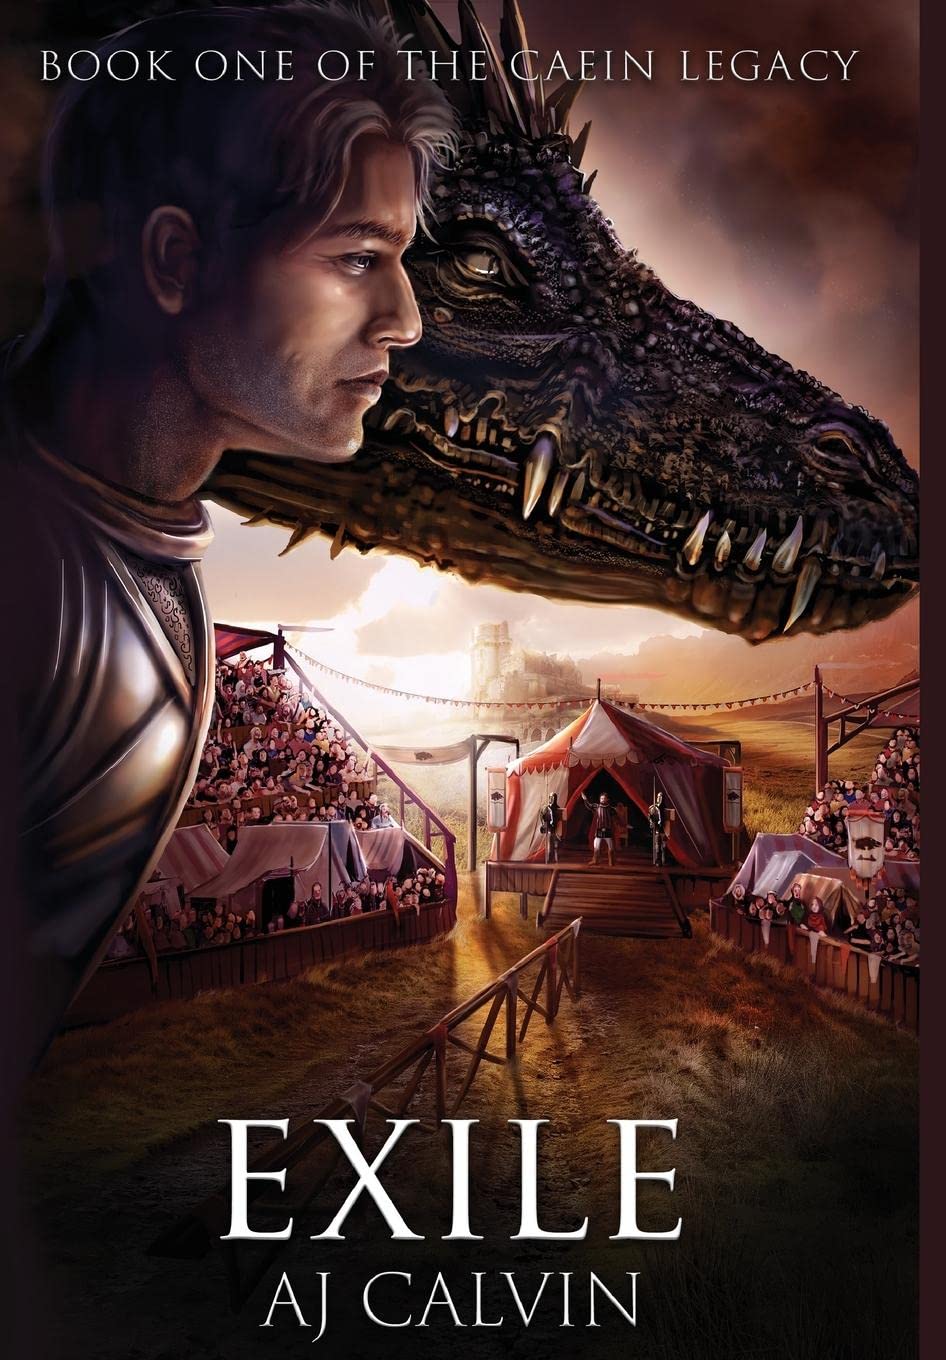 The cover of "Exile". The pictures of a man and a dragon dominate the foreground. The man has short blond hair and wears armor, and the dragon is black, with a long snout. In the background, we see a medieval arena, with grandstands in both sides and a pavillion in the middle.